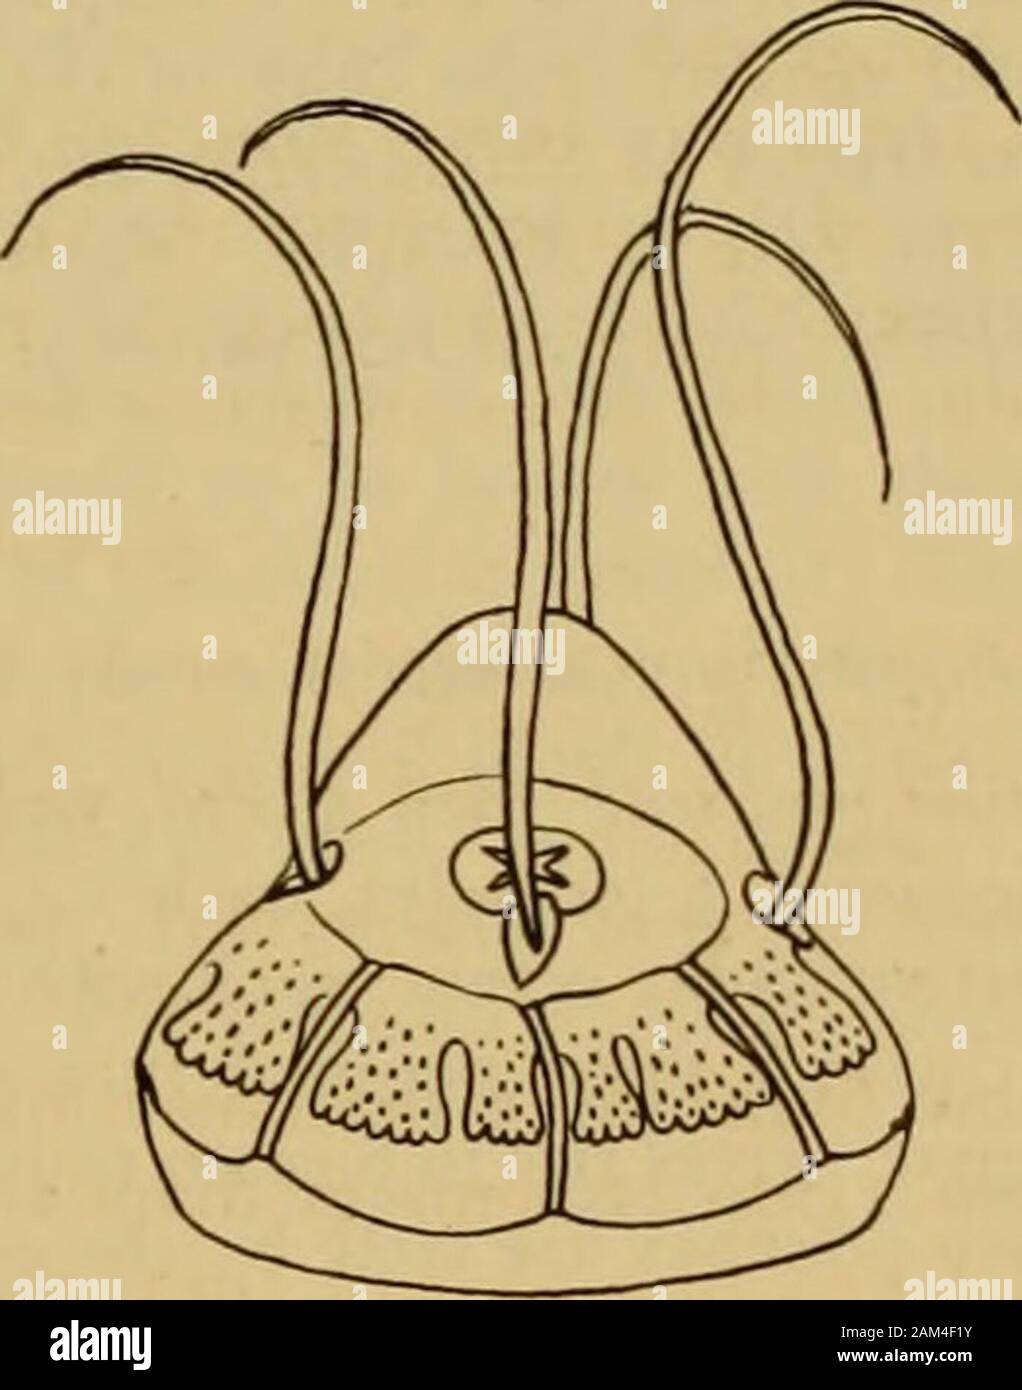 Medusae of the world . l°9a- 3°9- Fig. 309.—Mginura grimaldii, after Maas, in Result. Camp. Sci. Prince de Monaco.Fig. 309a.—Mginopsis laurentii, after Brandt, in Mem. Acad. St. Petersbourg. In the 3 male specimens from the Malay Archipelago, the gonads are developed over theectodermal subumbrella walls of the gastric pouches, but in the female from the North Atlanticthey are very irregularly developed in patches, in some places in the ectoderm of the pouchesand in others at the bases of the pouches. The eggs are few in number but are of great size. The gelatinous substance of the bell is milk Stock Photo